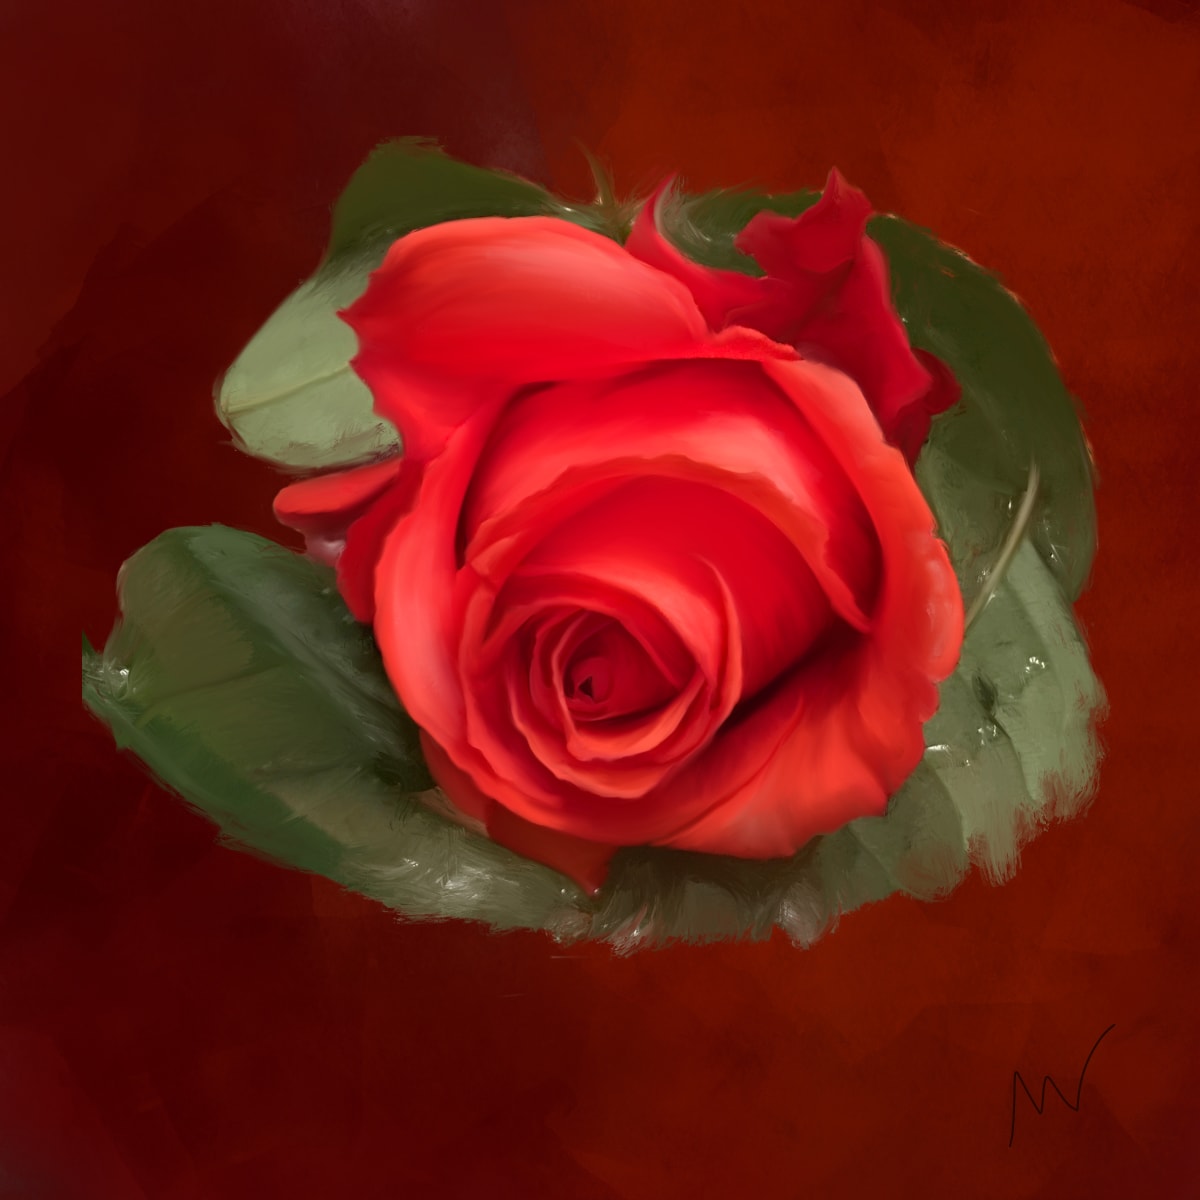 A Red Rose by Margo Thomas 